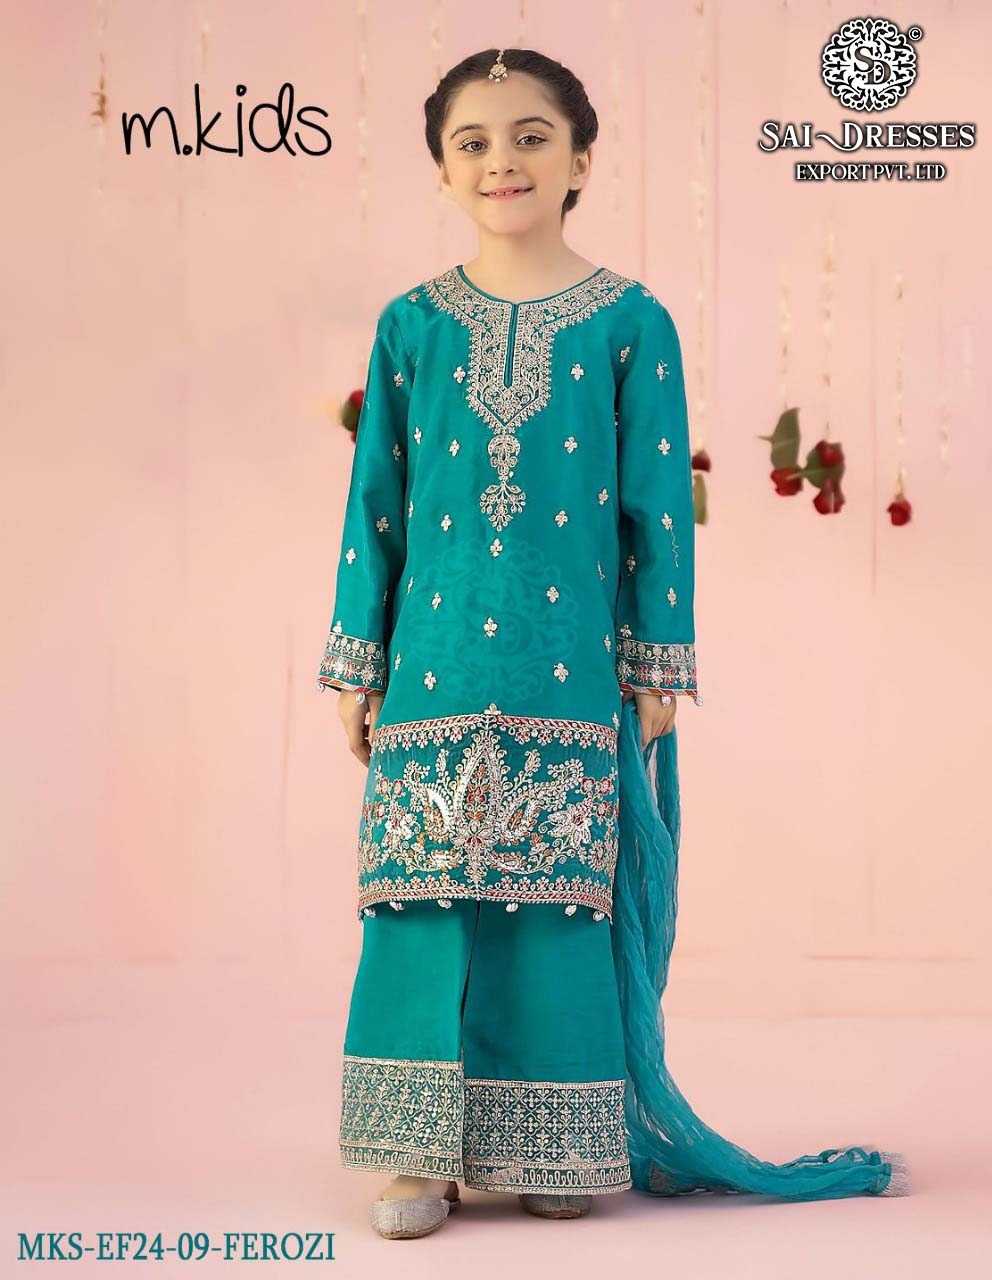 SAI DRESSES PRESENT D.NO 34 READY TO PARTY WEAR GHARARA STYLE DESIGNER PAKISTANI KIDS COMBO SUITS IN WHOLESALE RATE IN SURAT